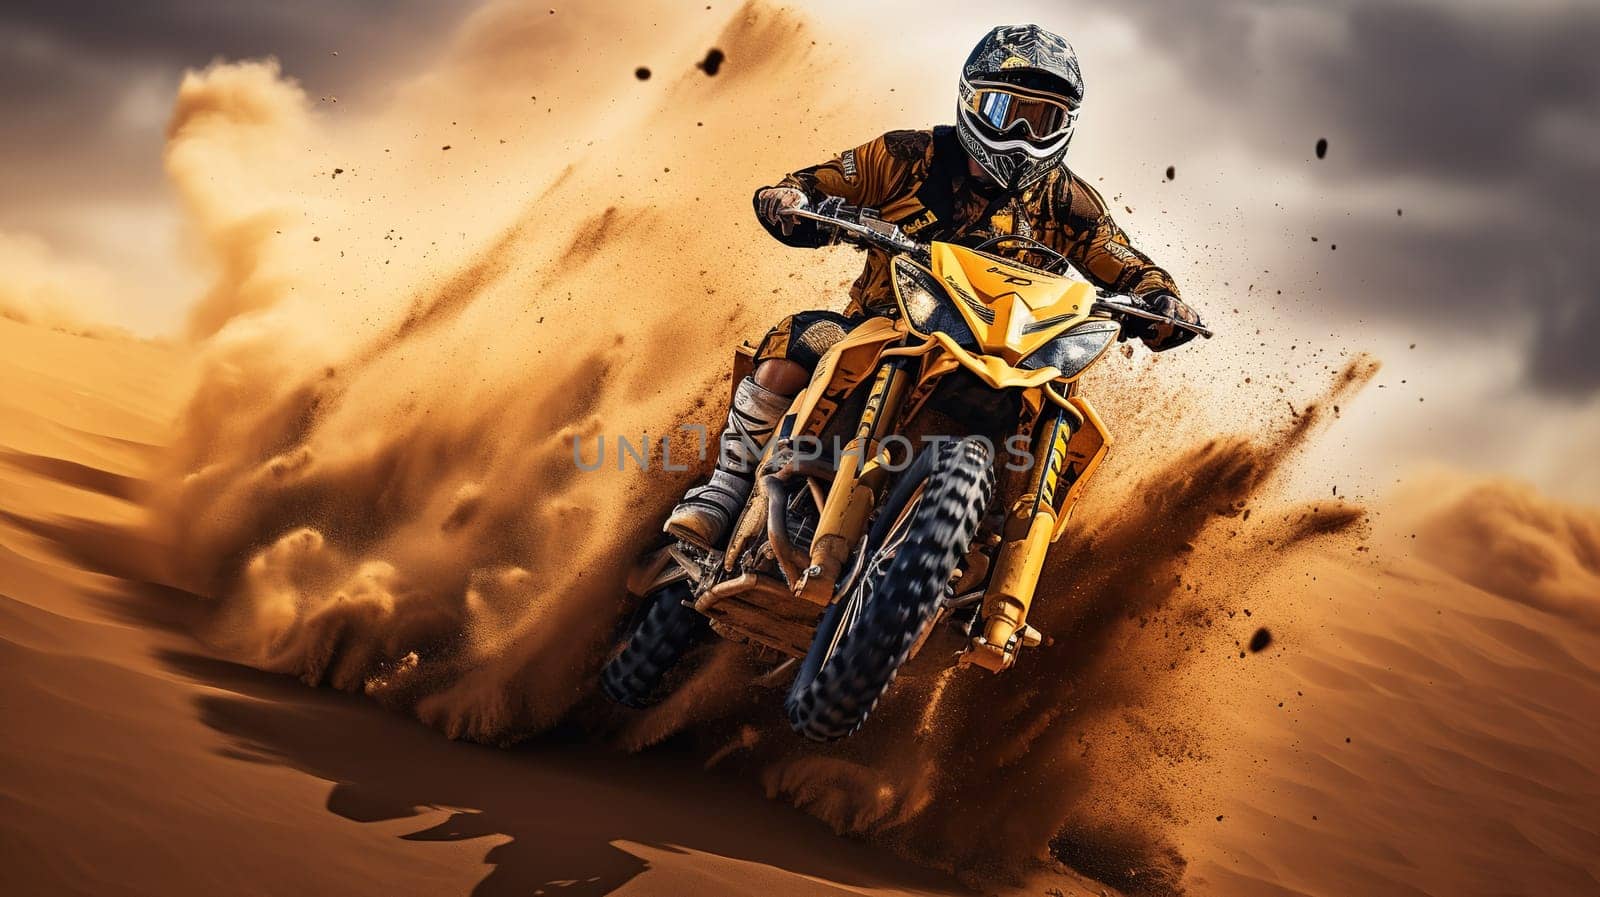 Competitive quad biker kicking up a plume of sand while racing over a sand dune Generate AI by Mrsongrphc